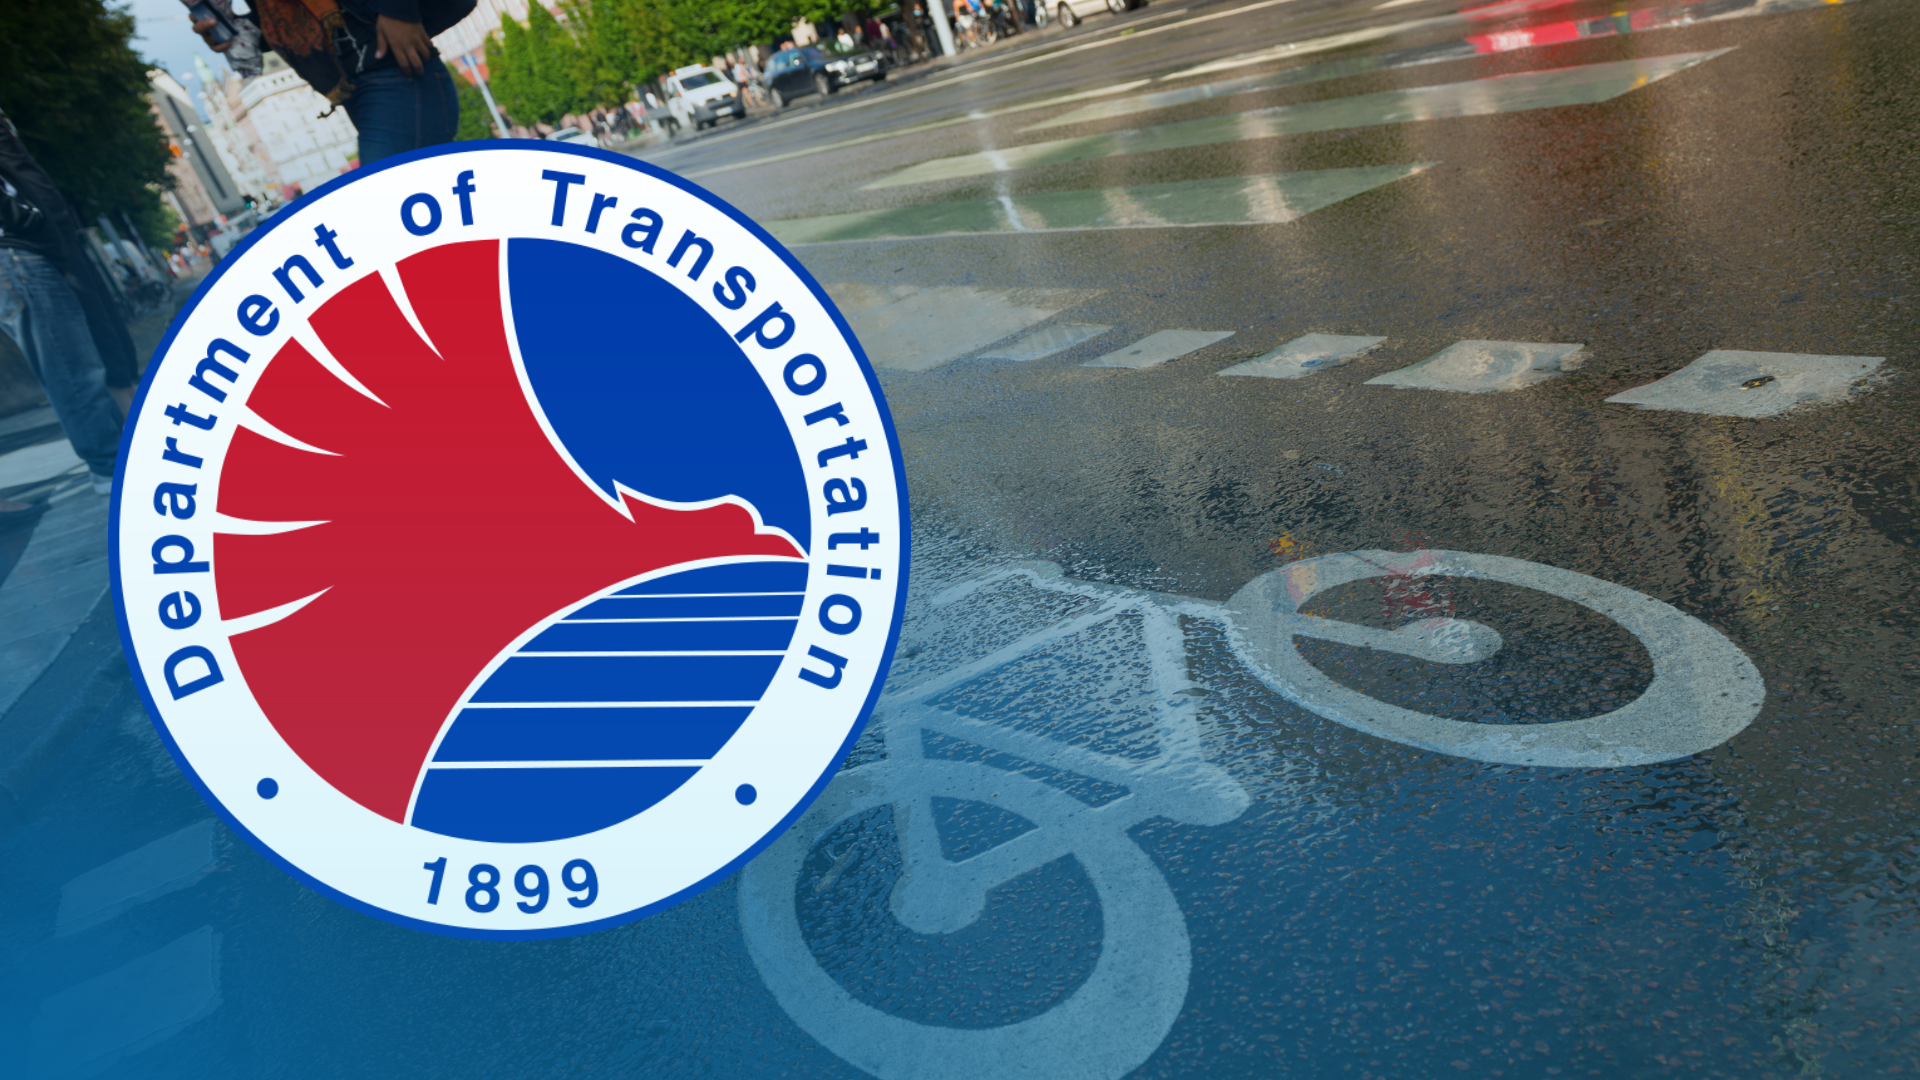 The Department of Transportation (DOTr) said on Friday that it targets expanding bike lanes in major cities and adjacent municipalities in the country by 2028.